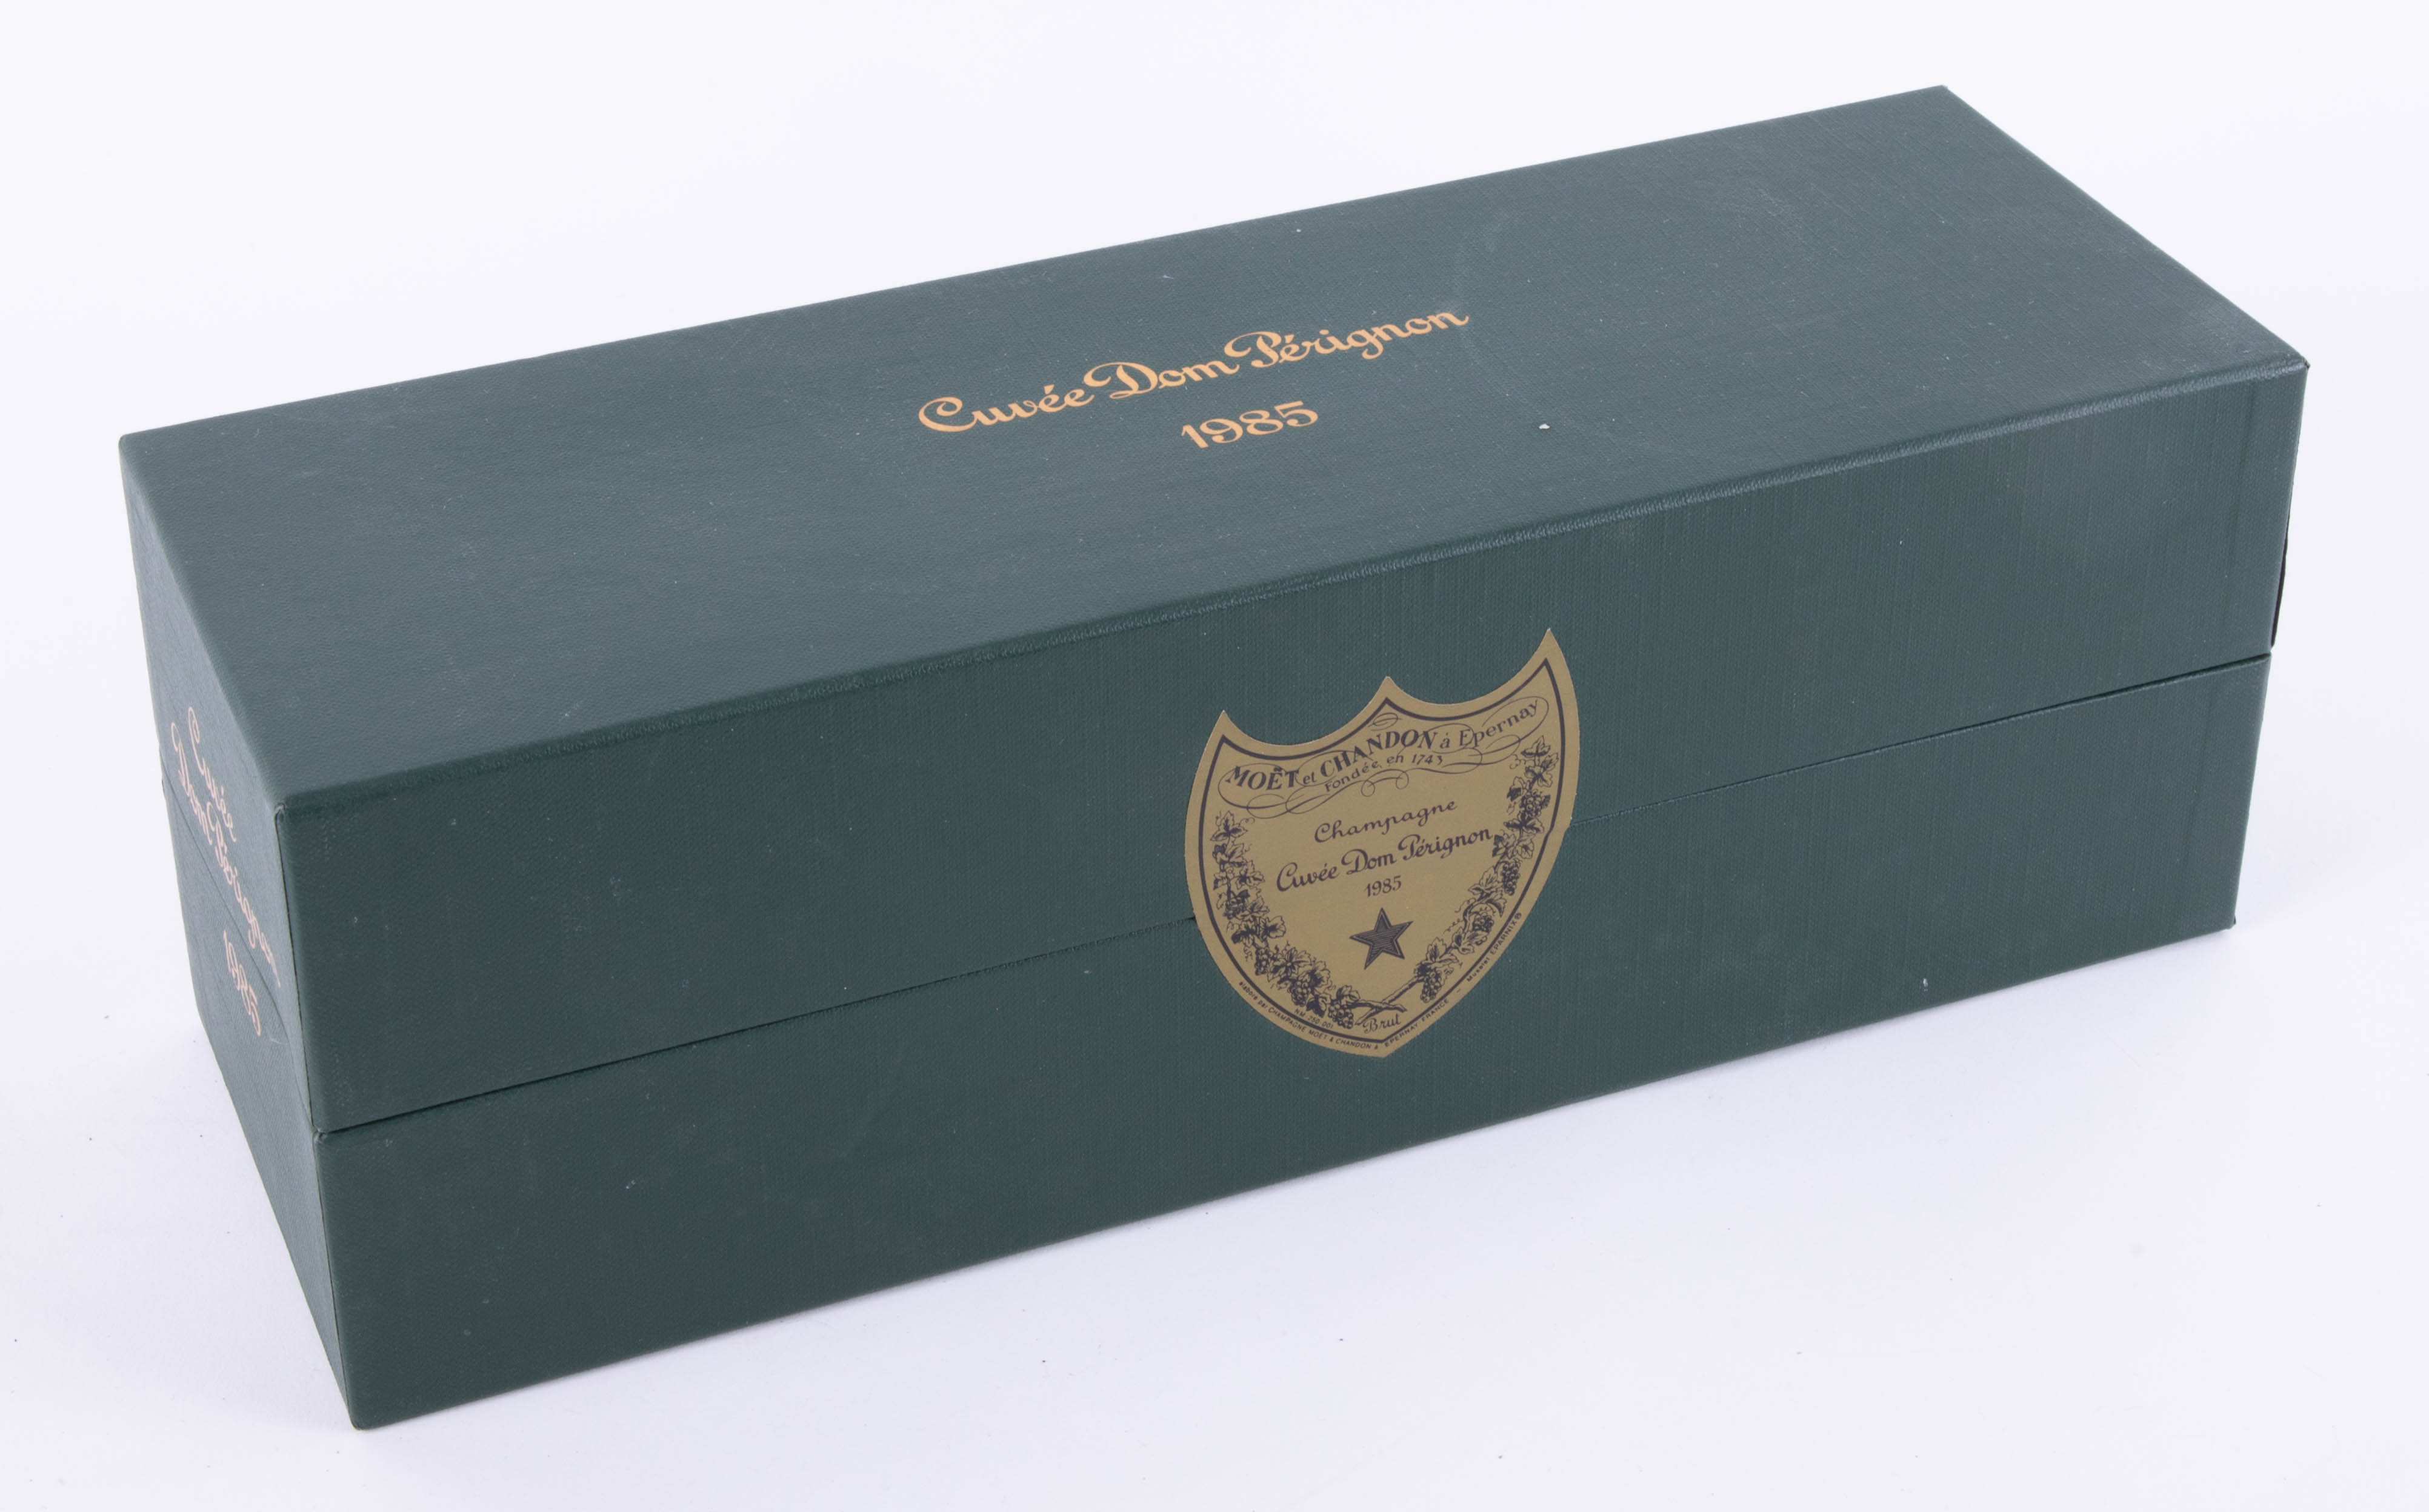 Dom Perignon, 1985 Moet and Chandon Champagne, boxed.